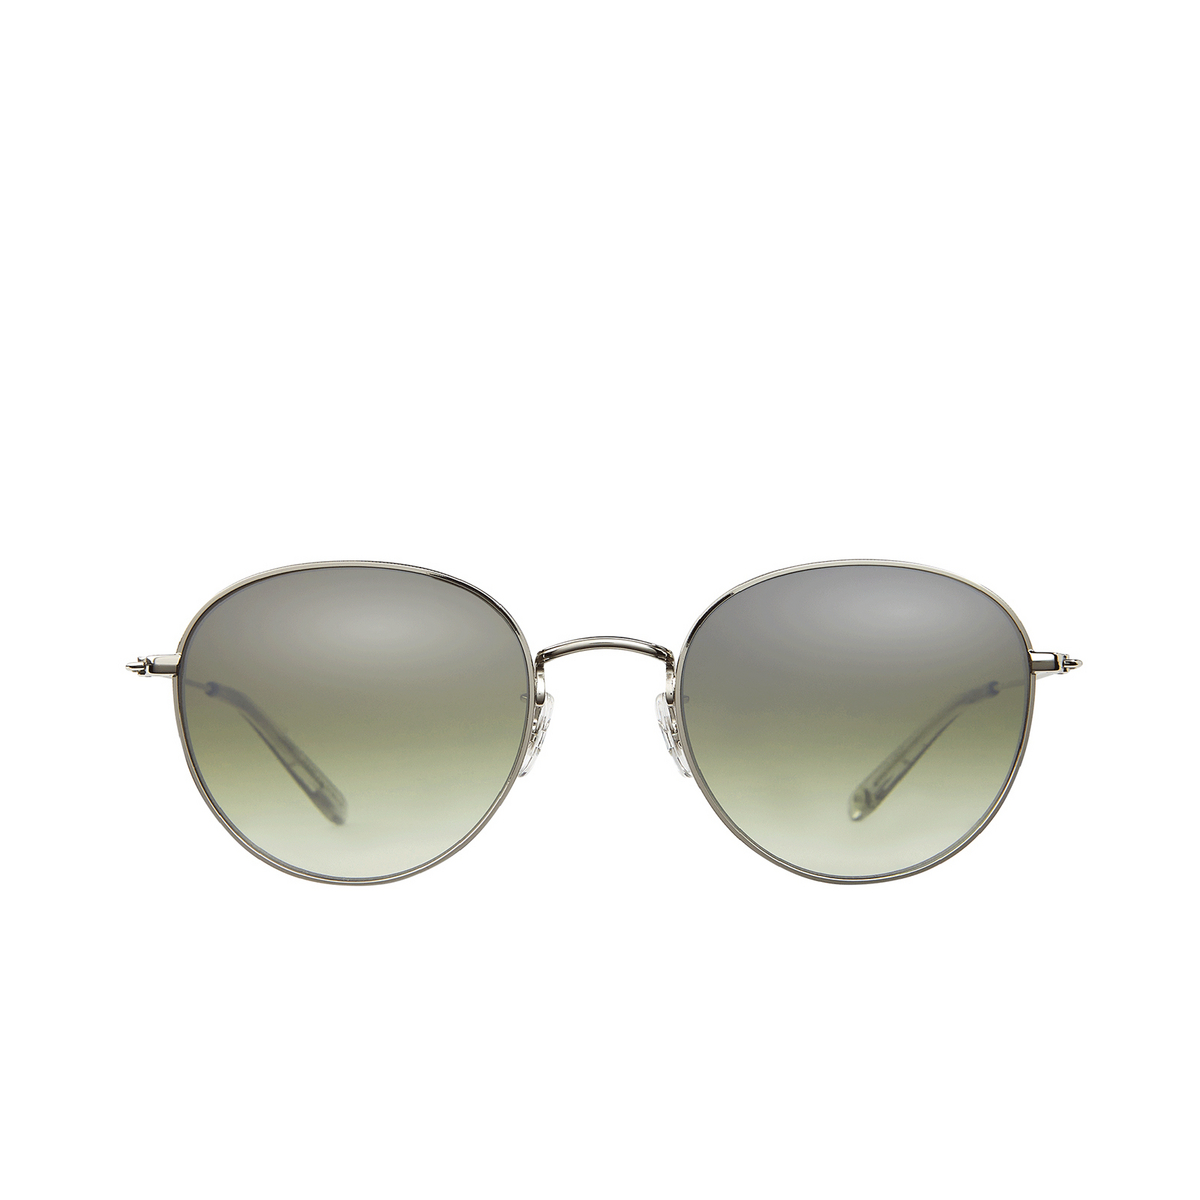 Garrett Leight® Round Sunglasses: Paloma M Sun color Silver-llg/semi-flat Olive Layered Mirror Sv-llg/sfolvlm - front view.